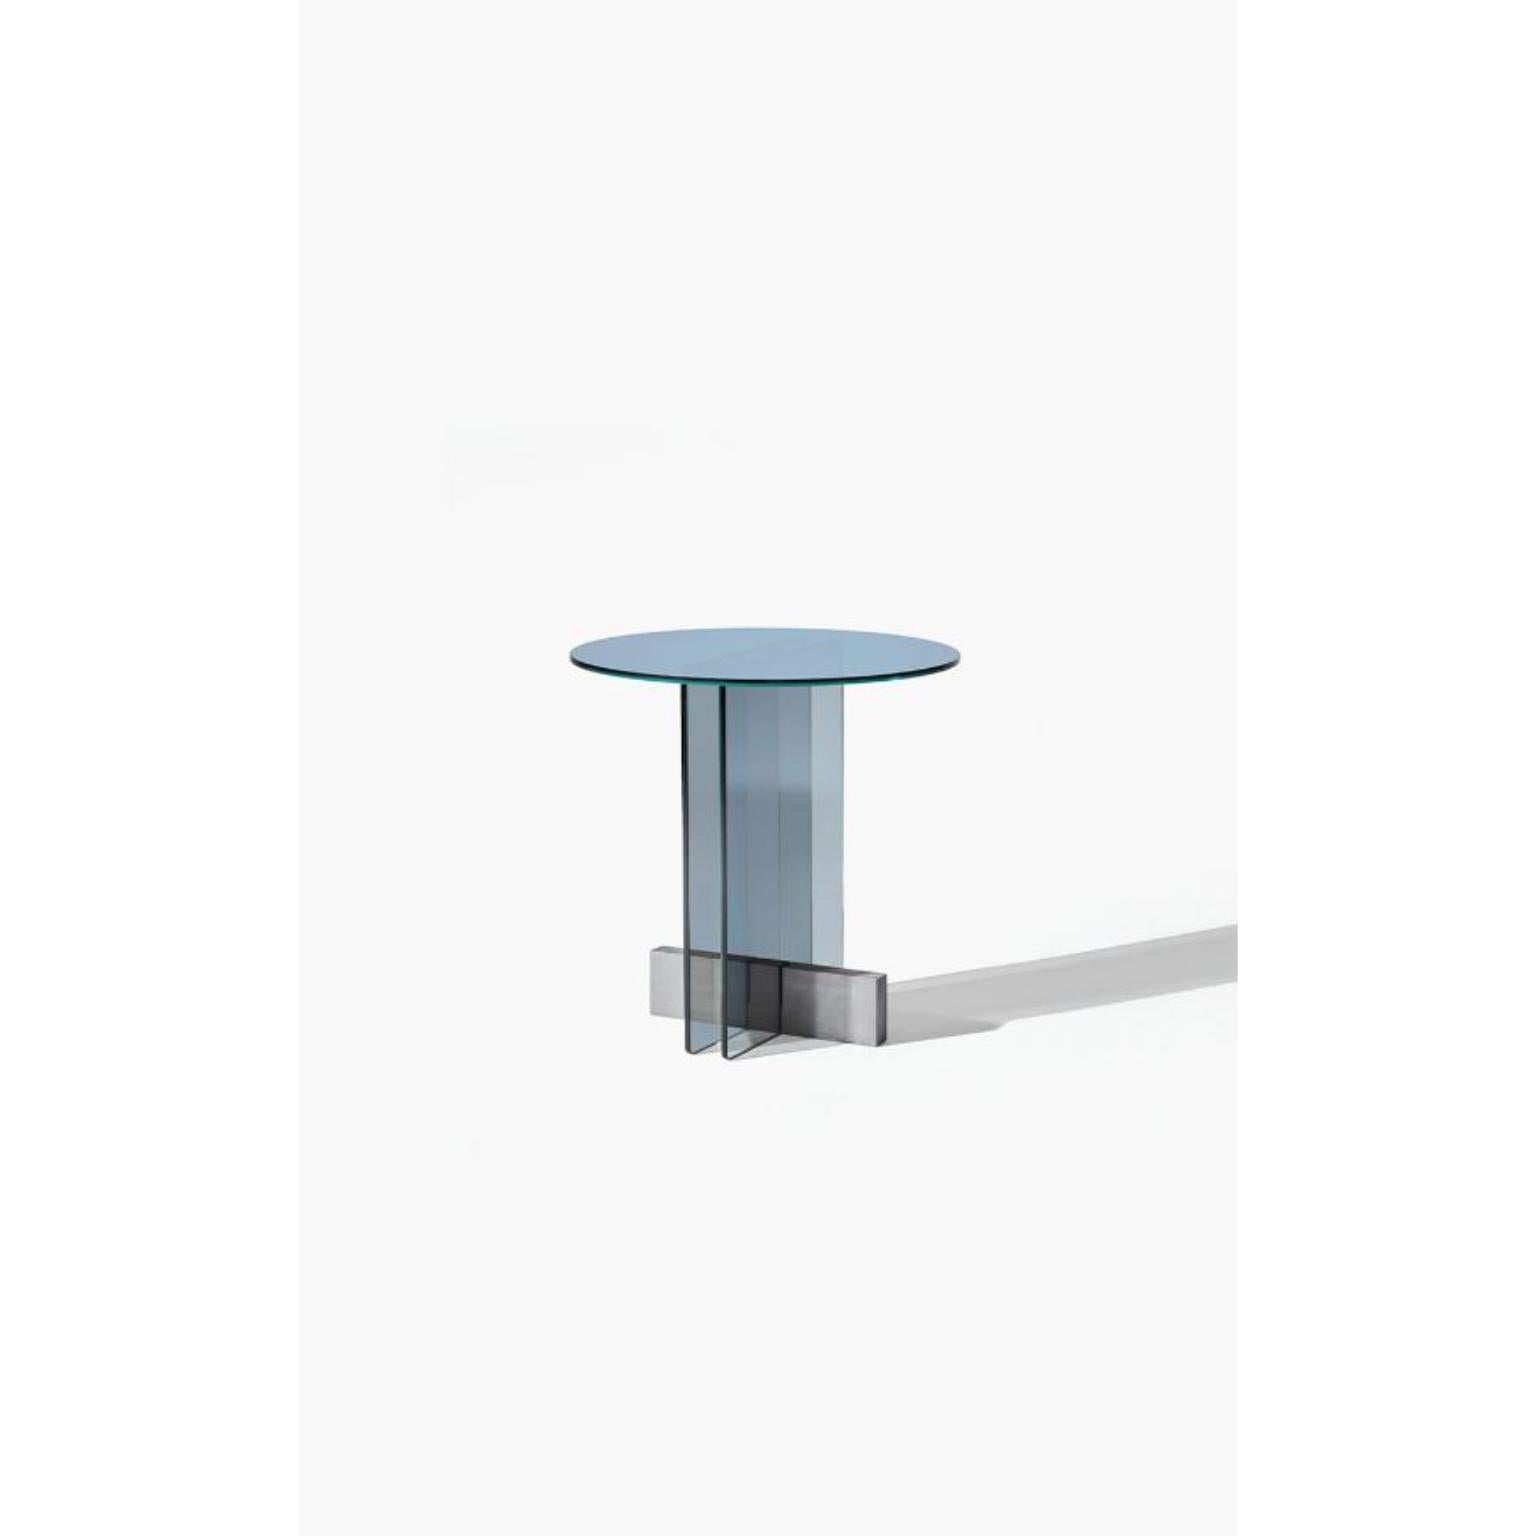 Vidro Side Table L by Wentz
Dimensions: D 60 x W 60 x H 50 cm
Materials: Glass, Wood.
Weight: 17,2kg / 38 lbs

The constant search for lightness in different forms led to a new project that has glass as the protagonist. The wooden base works as a